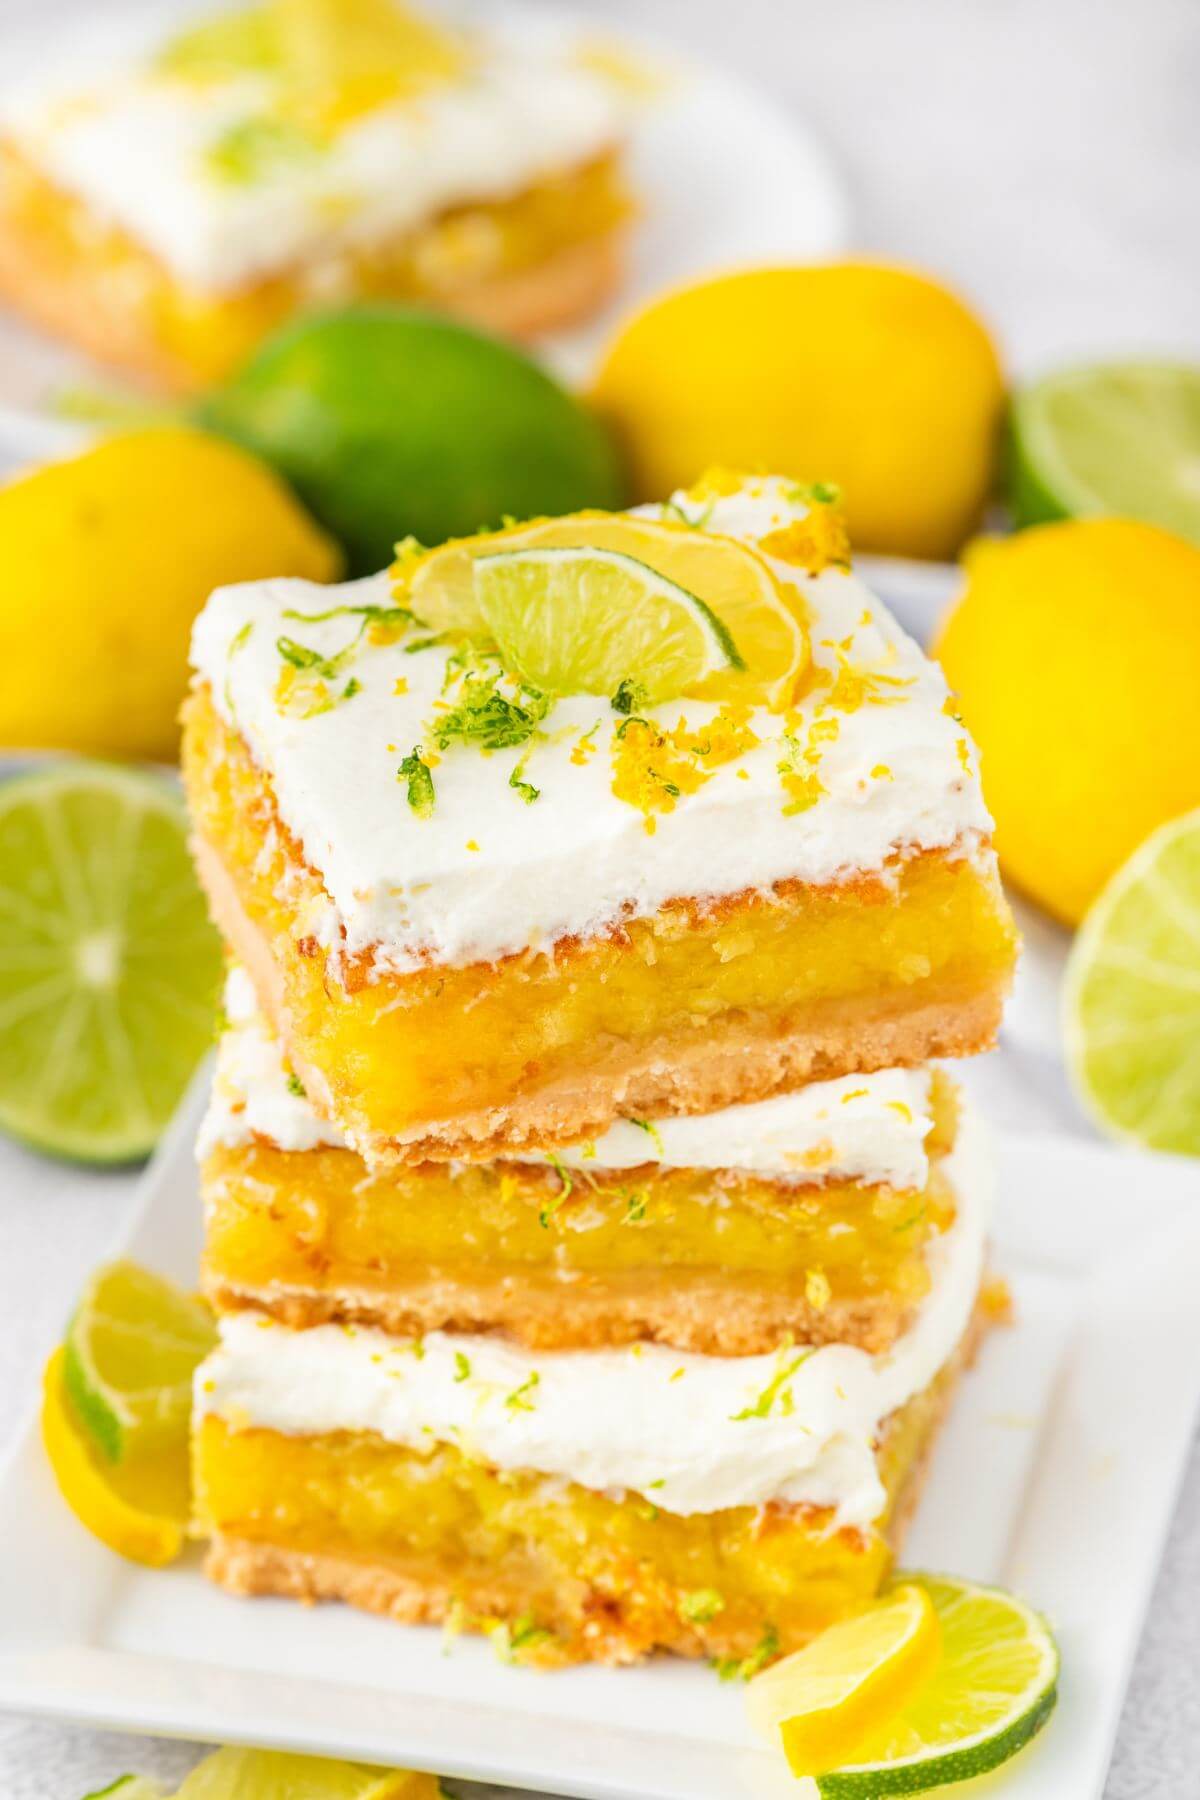 Three yellow dessert squares are stacked on top of each other in front of fresh lemons and limes.